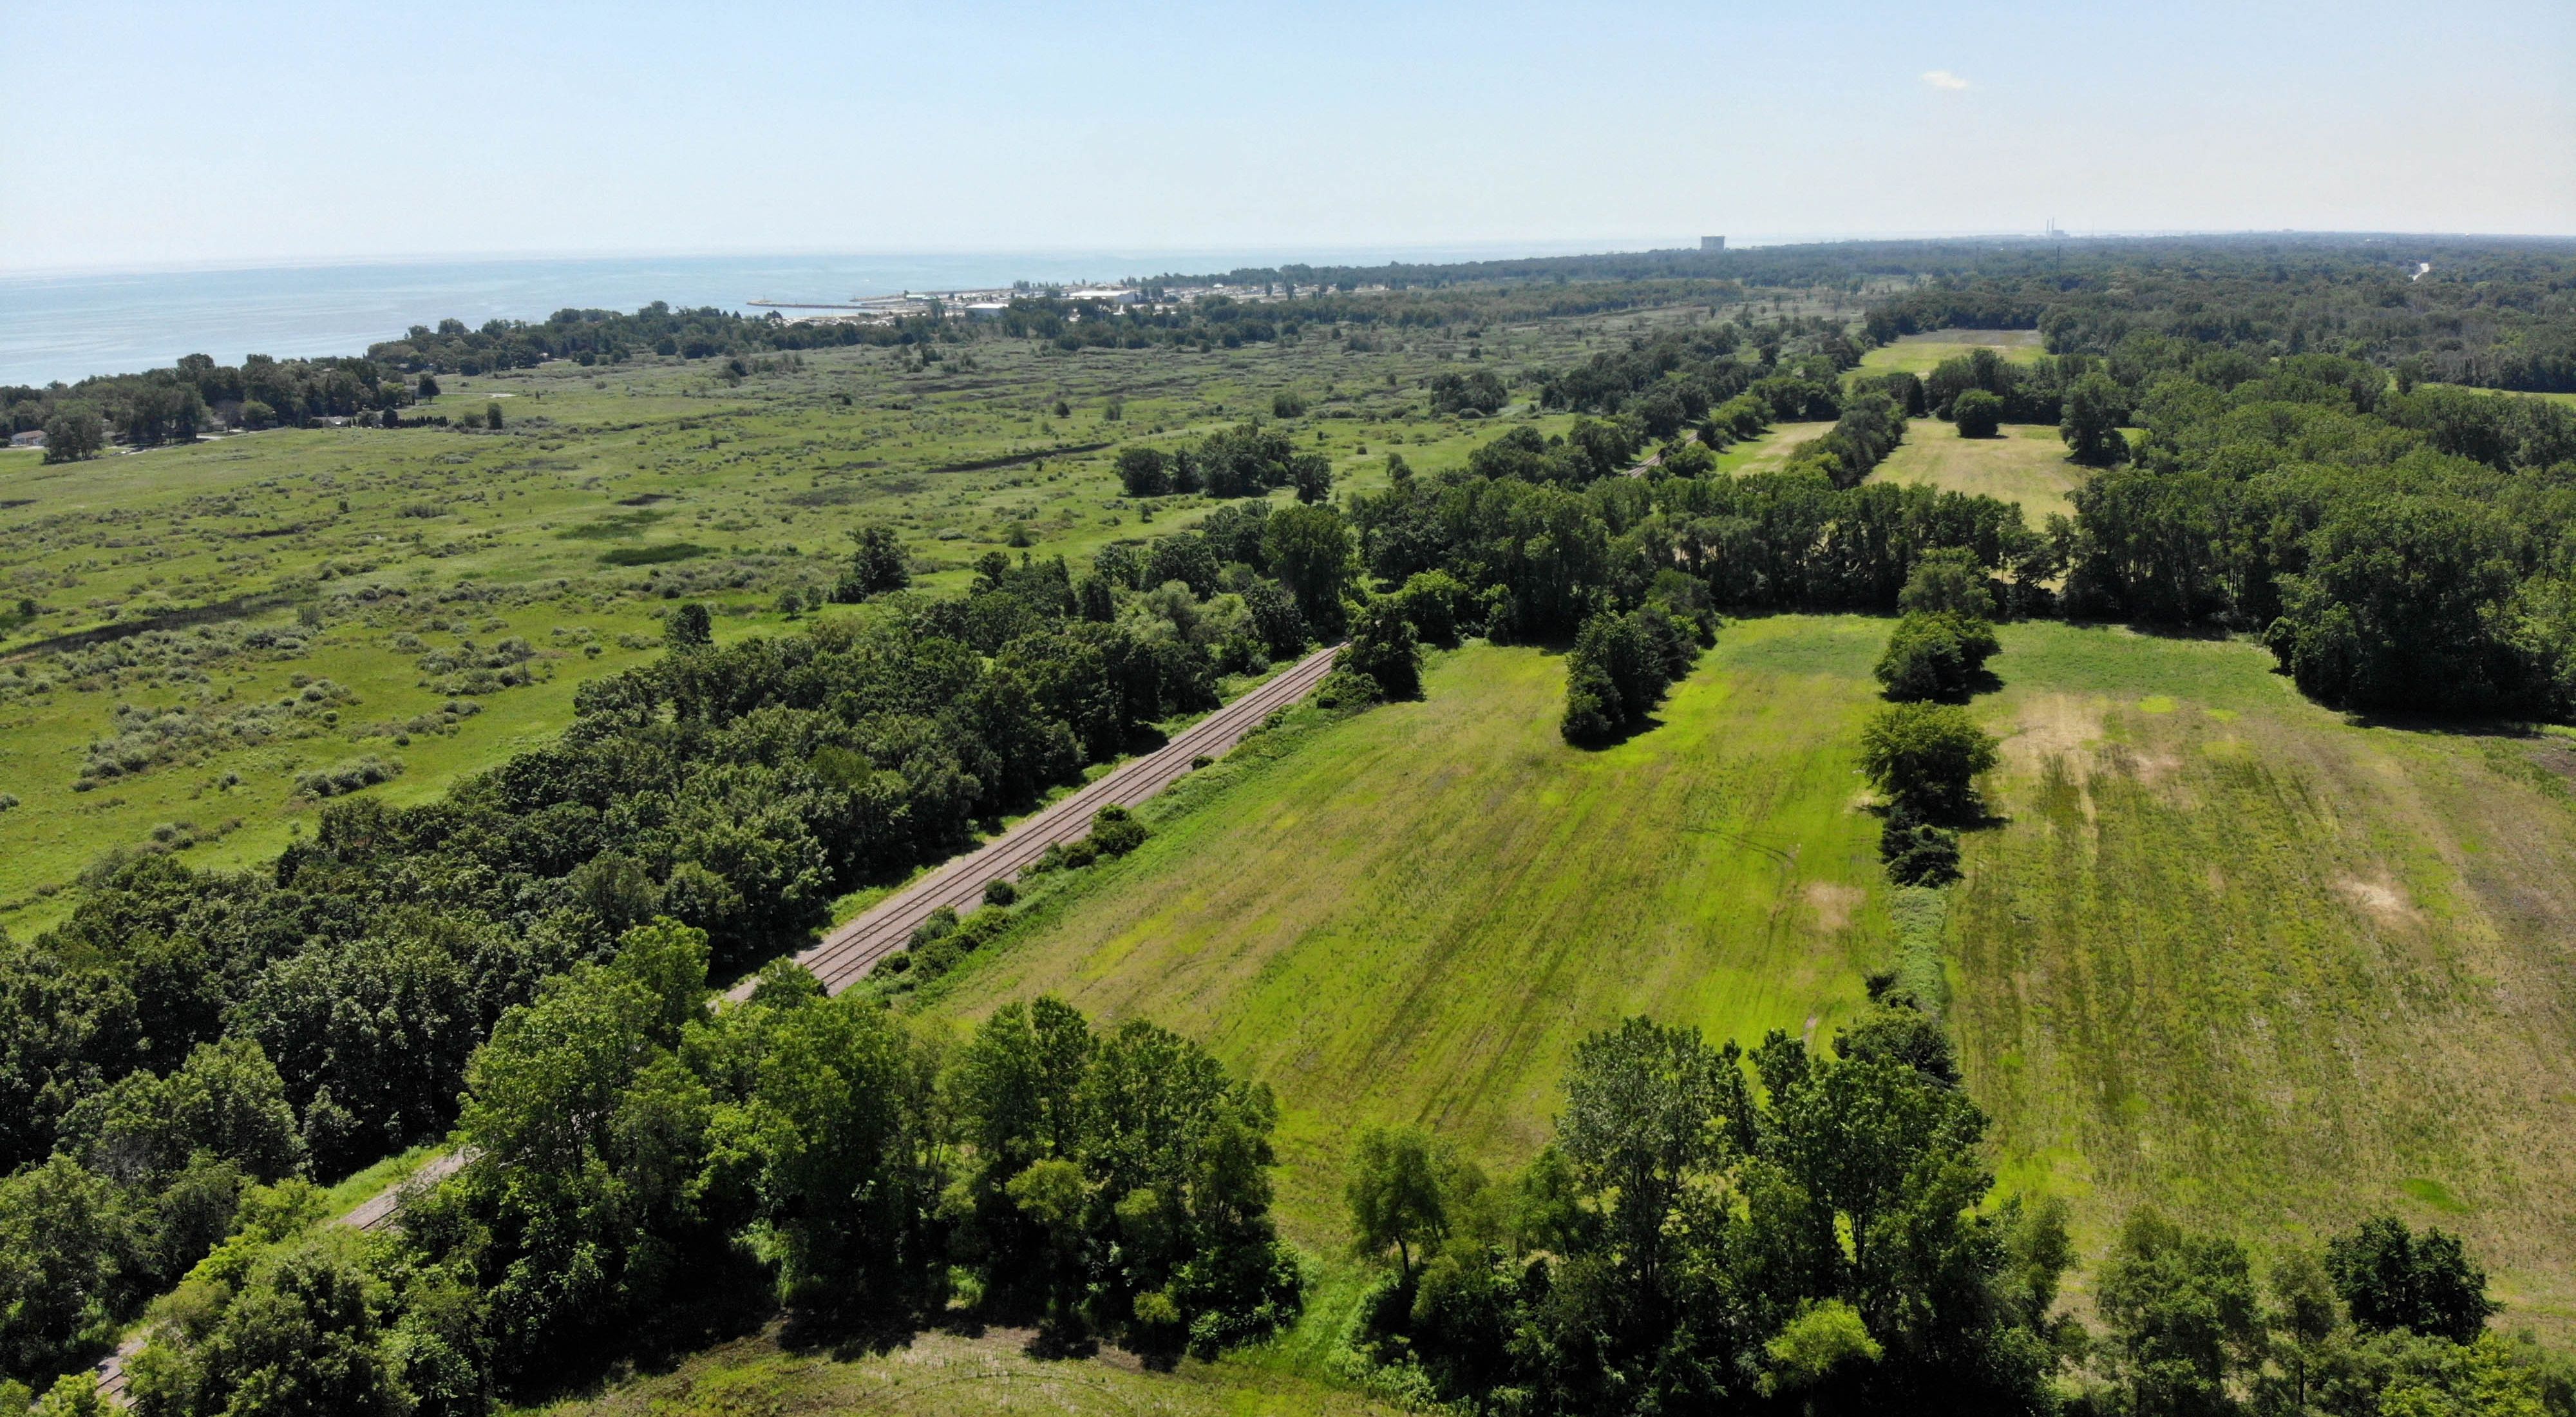 Aerial photo showing the restoration area in the foreground with open land and trees, the Chiwaukee Prairie wetlands beyond that and Lake Michigan in the distance.